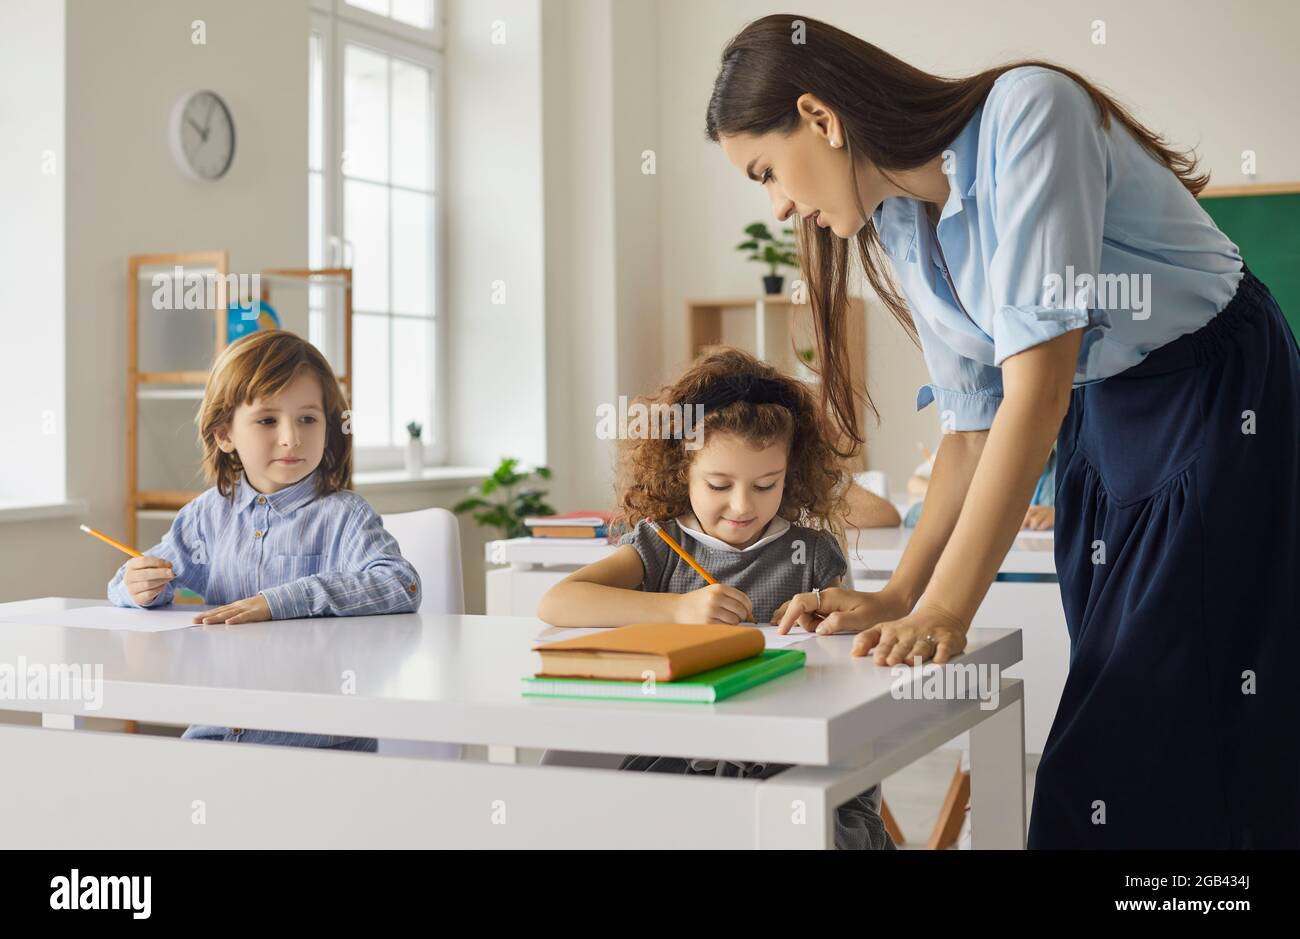 Elementary school students sit at desks and write or draw under the supervision of a school teacher. Stock Photo